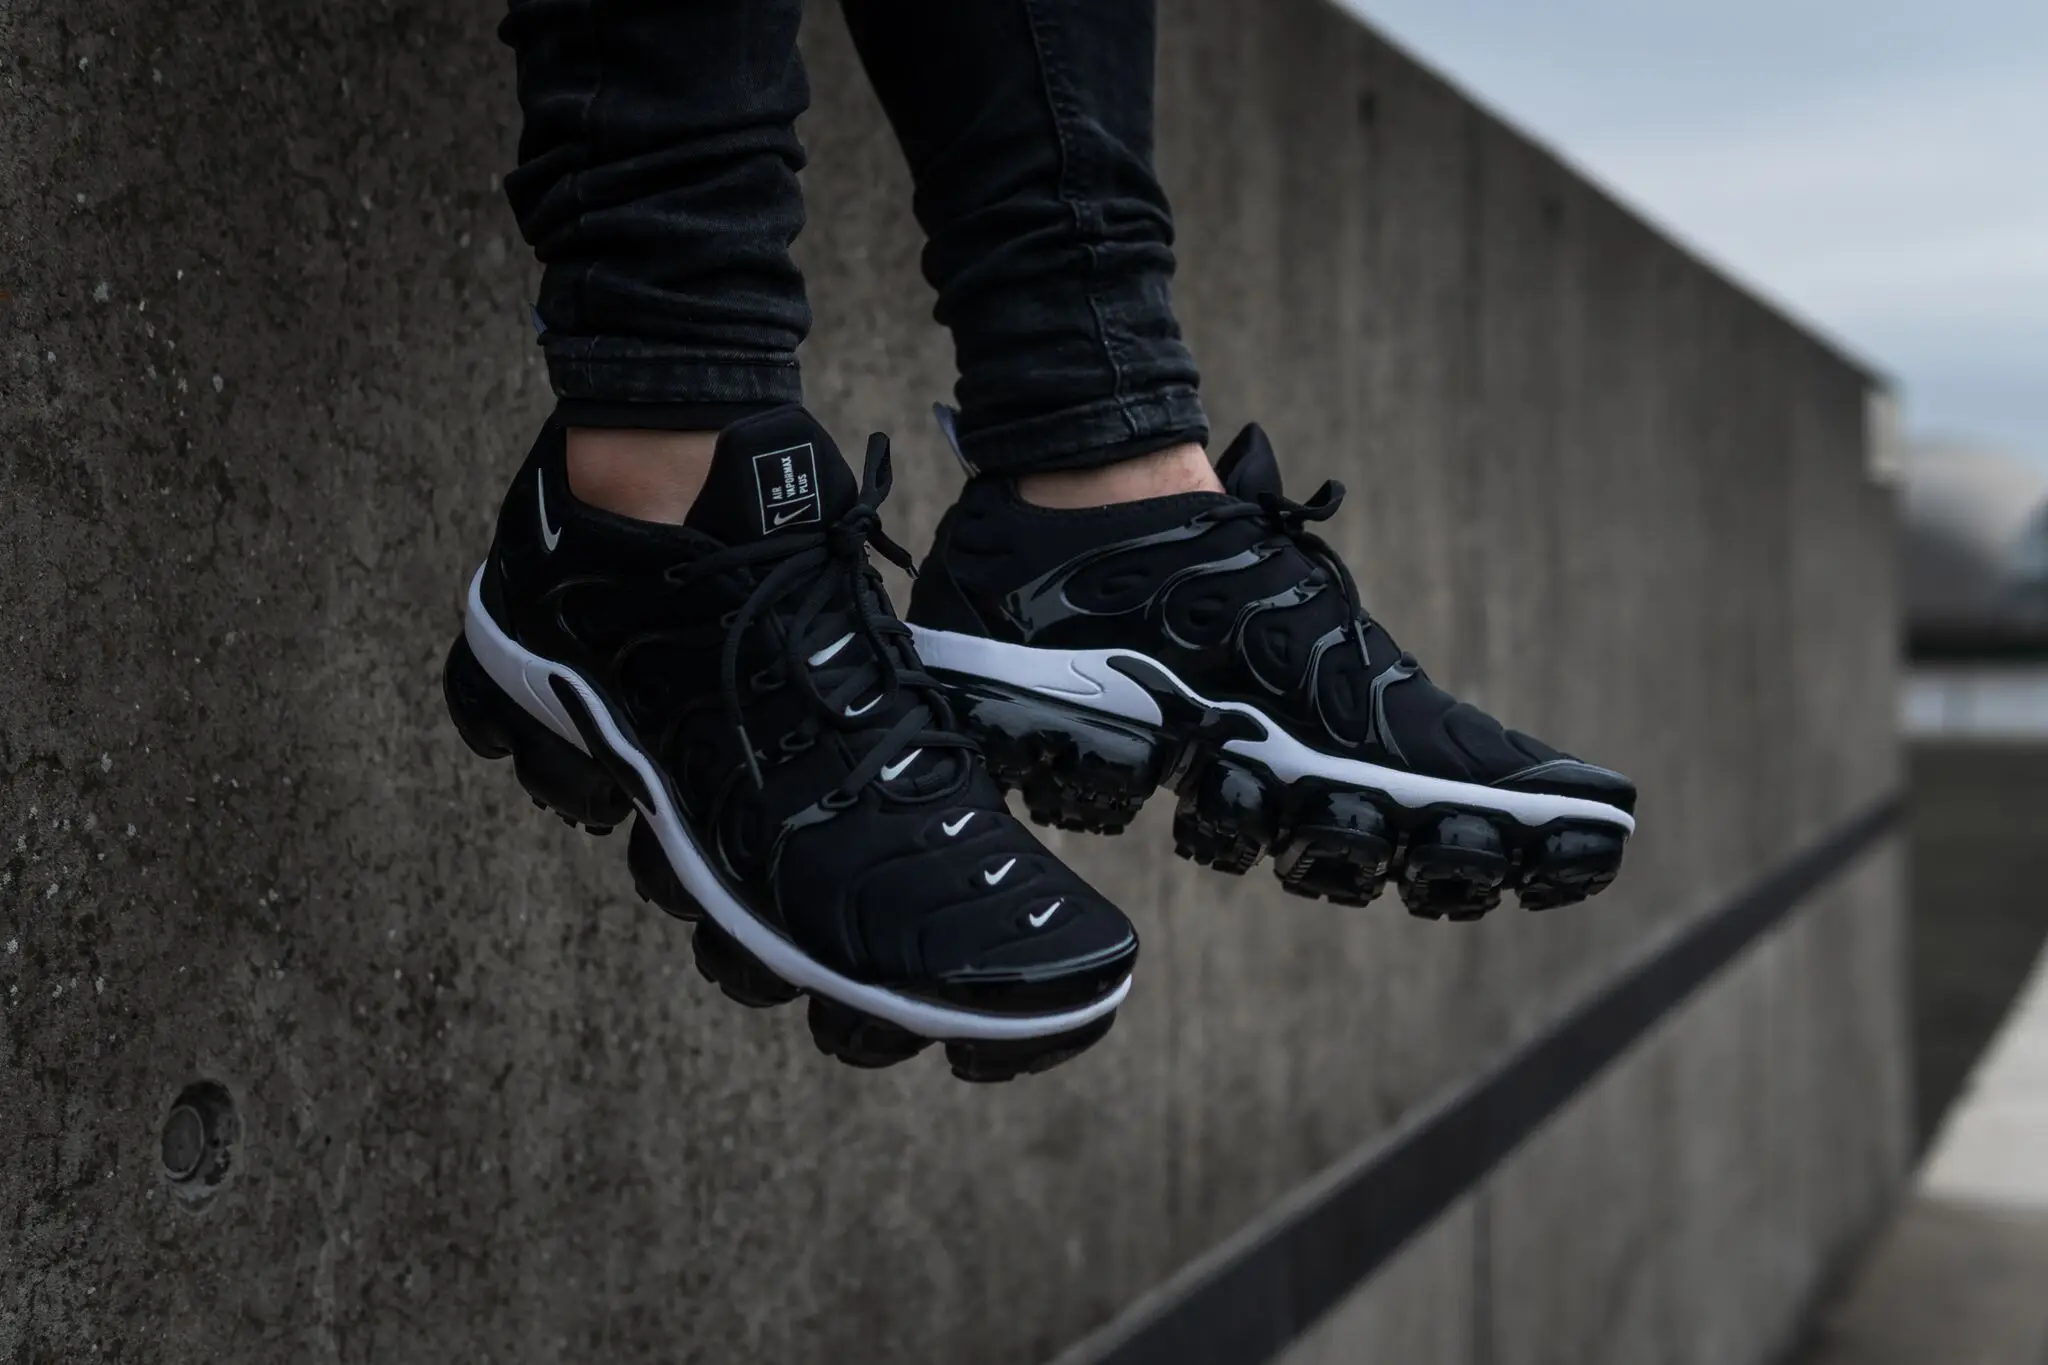 Bold Branding Features On The Nike Air VaporMax Plus 'Black/White